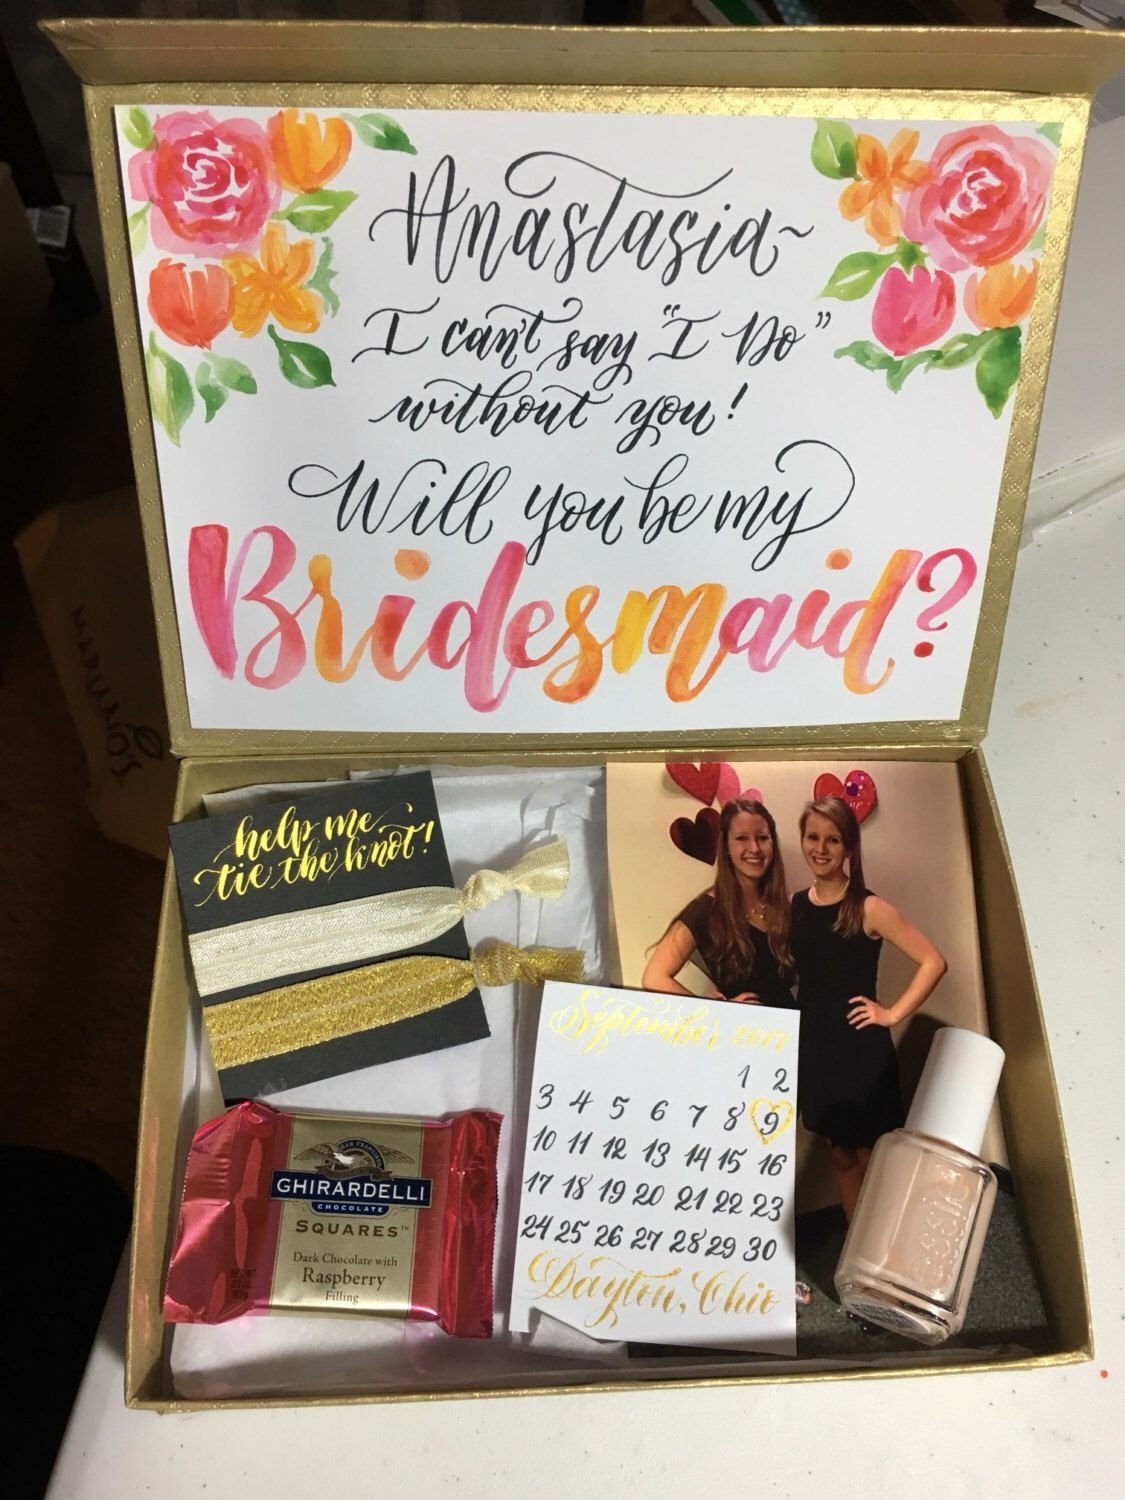 10 Great Will You Be My Bridesmaid Ideas personalized bridesmaid proposal box 8 5 x 6 x 1 5 inches box 1 2022